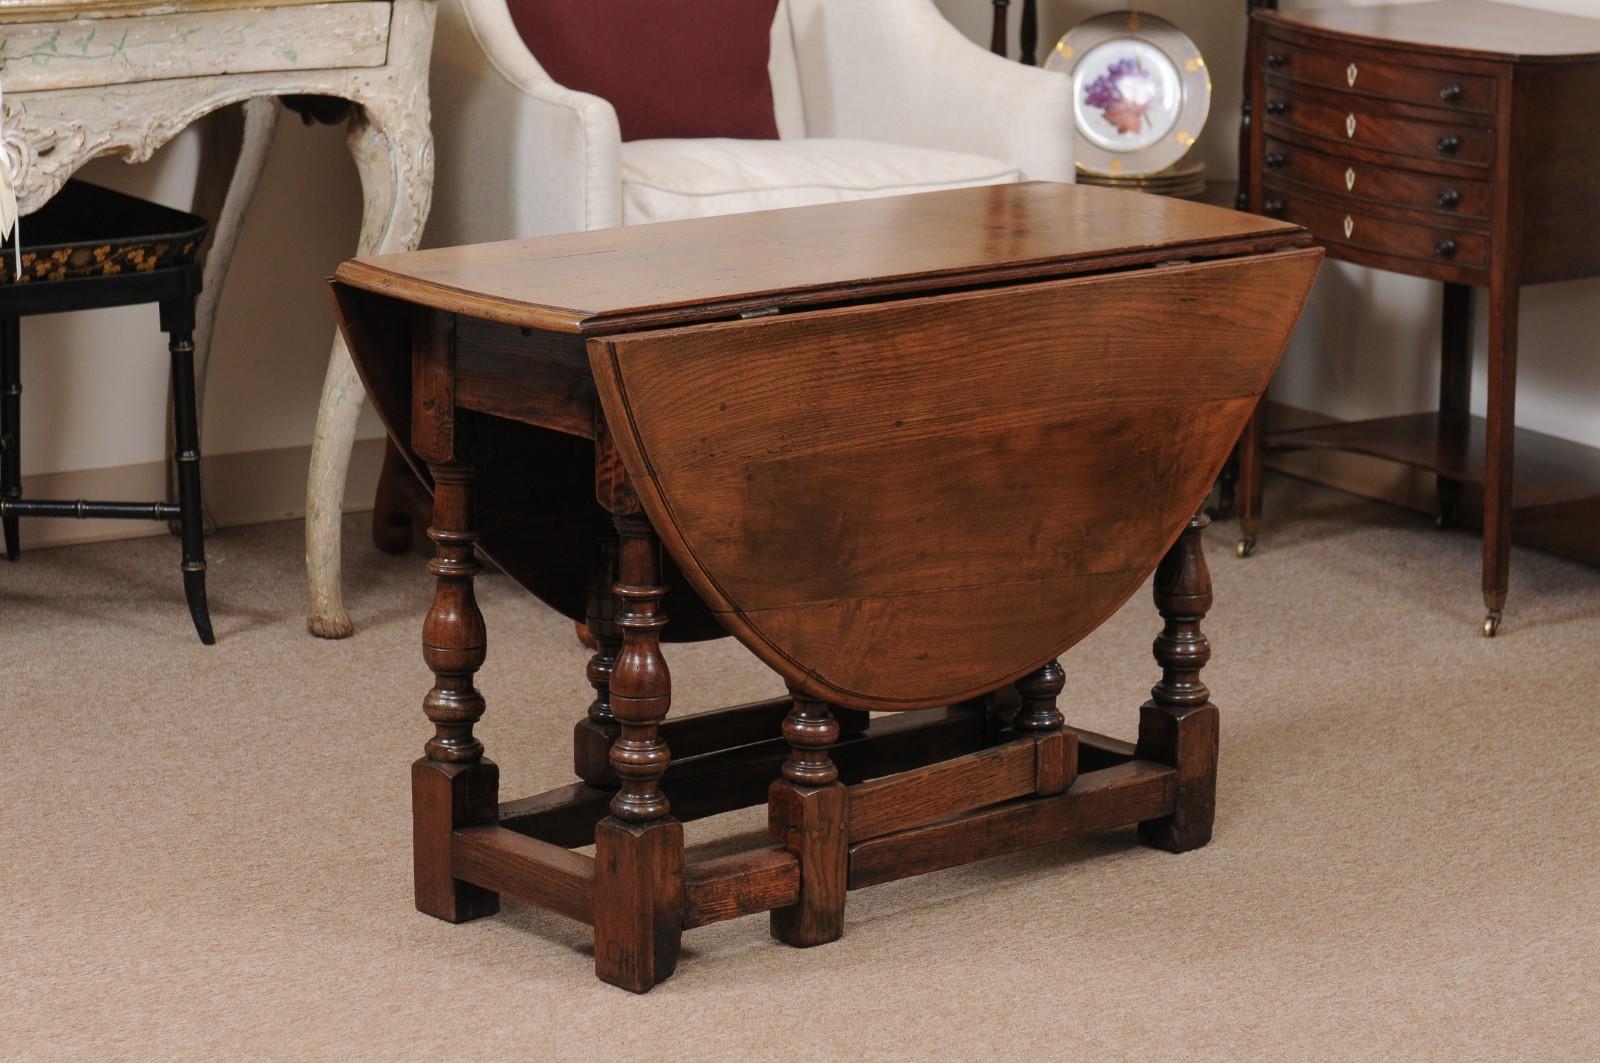 18th Century English Walnut Gate Leg Table with Drop Leaves & Turned Legs For Sale 9